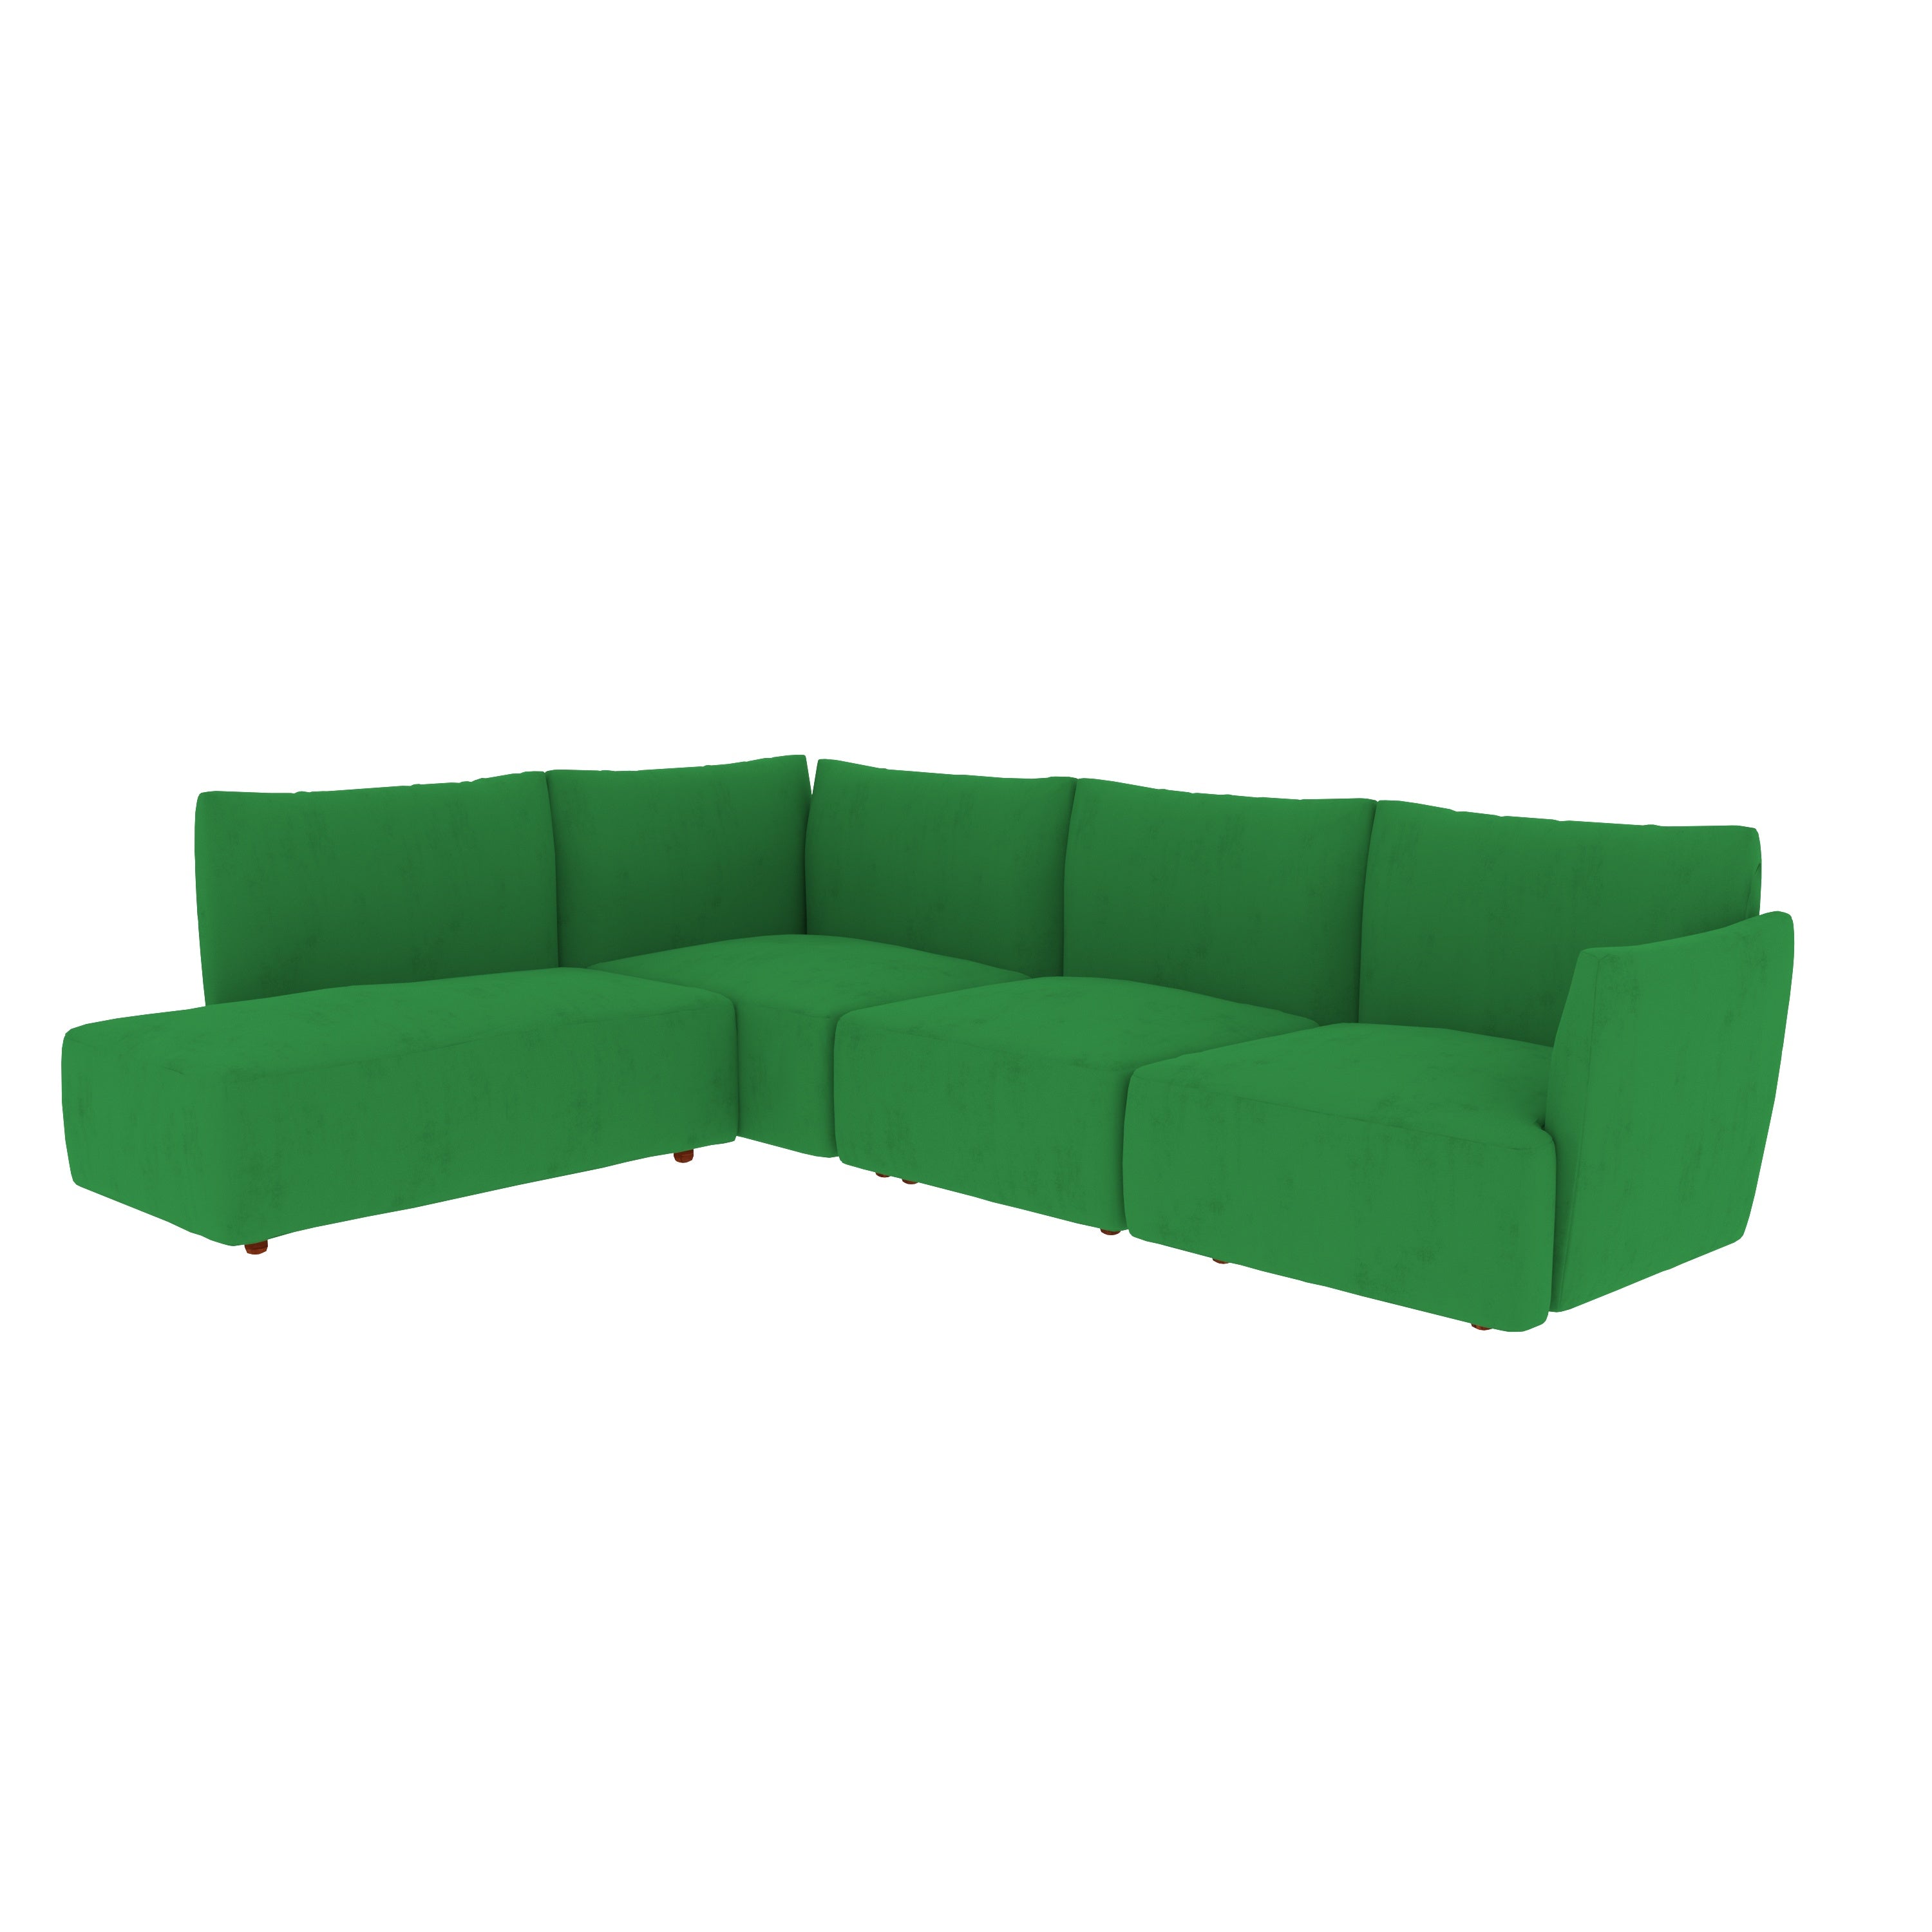 Forest Green Pastel Coloured with Premium Comfort L Shaped 4 Seater Sofa Set for Home Sofa